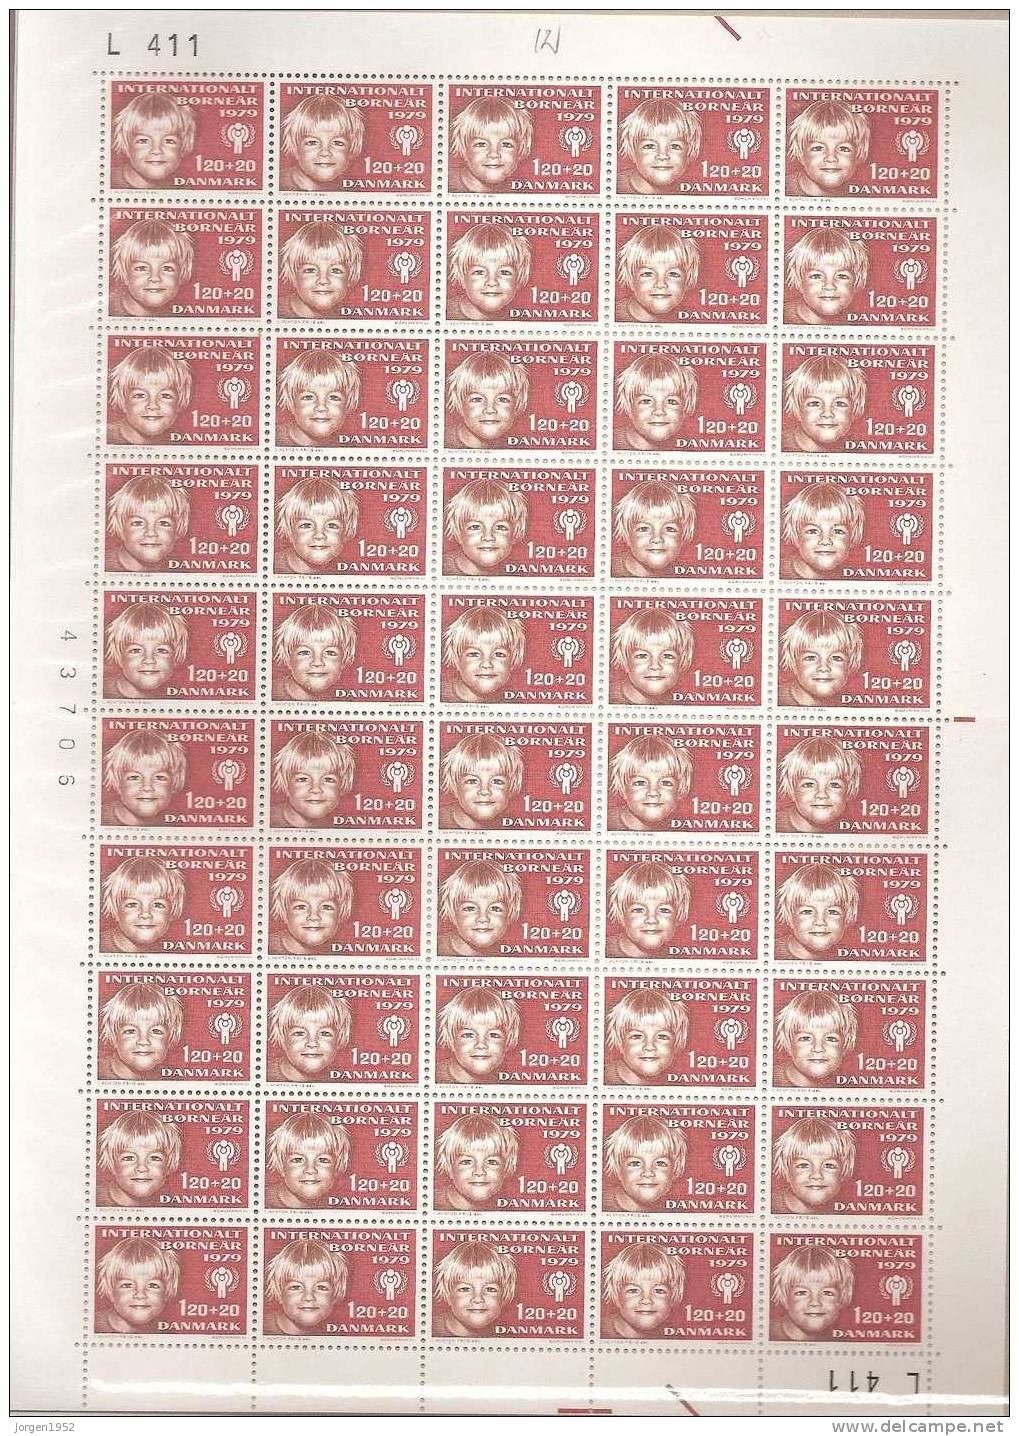 DENMARK SHEETS  FROM  YEAR 1979 MARGINAL NUMBER   L 411 - Full Sheets & Multiples